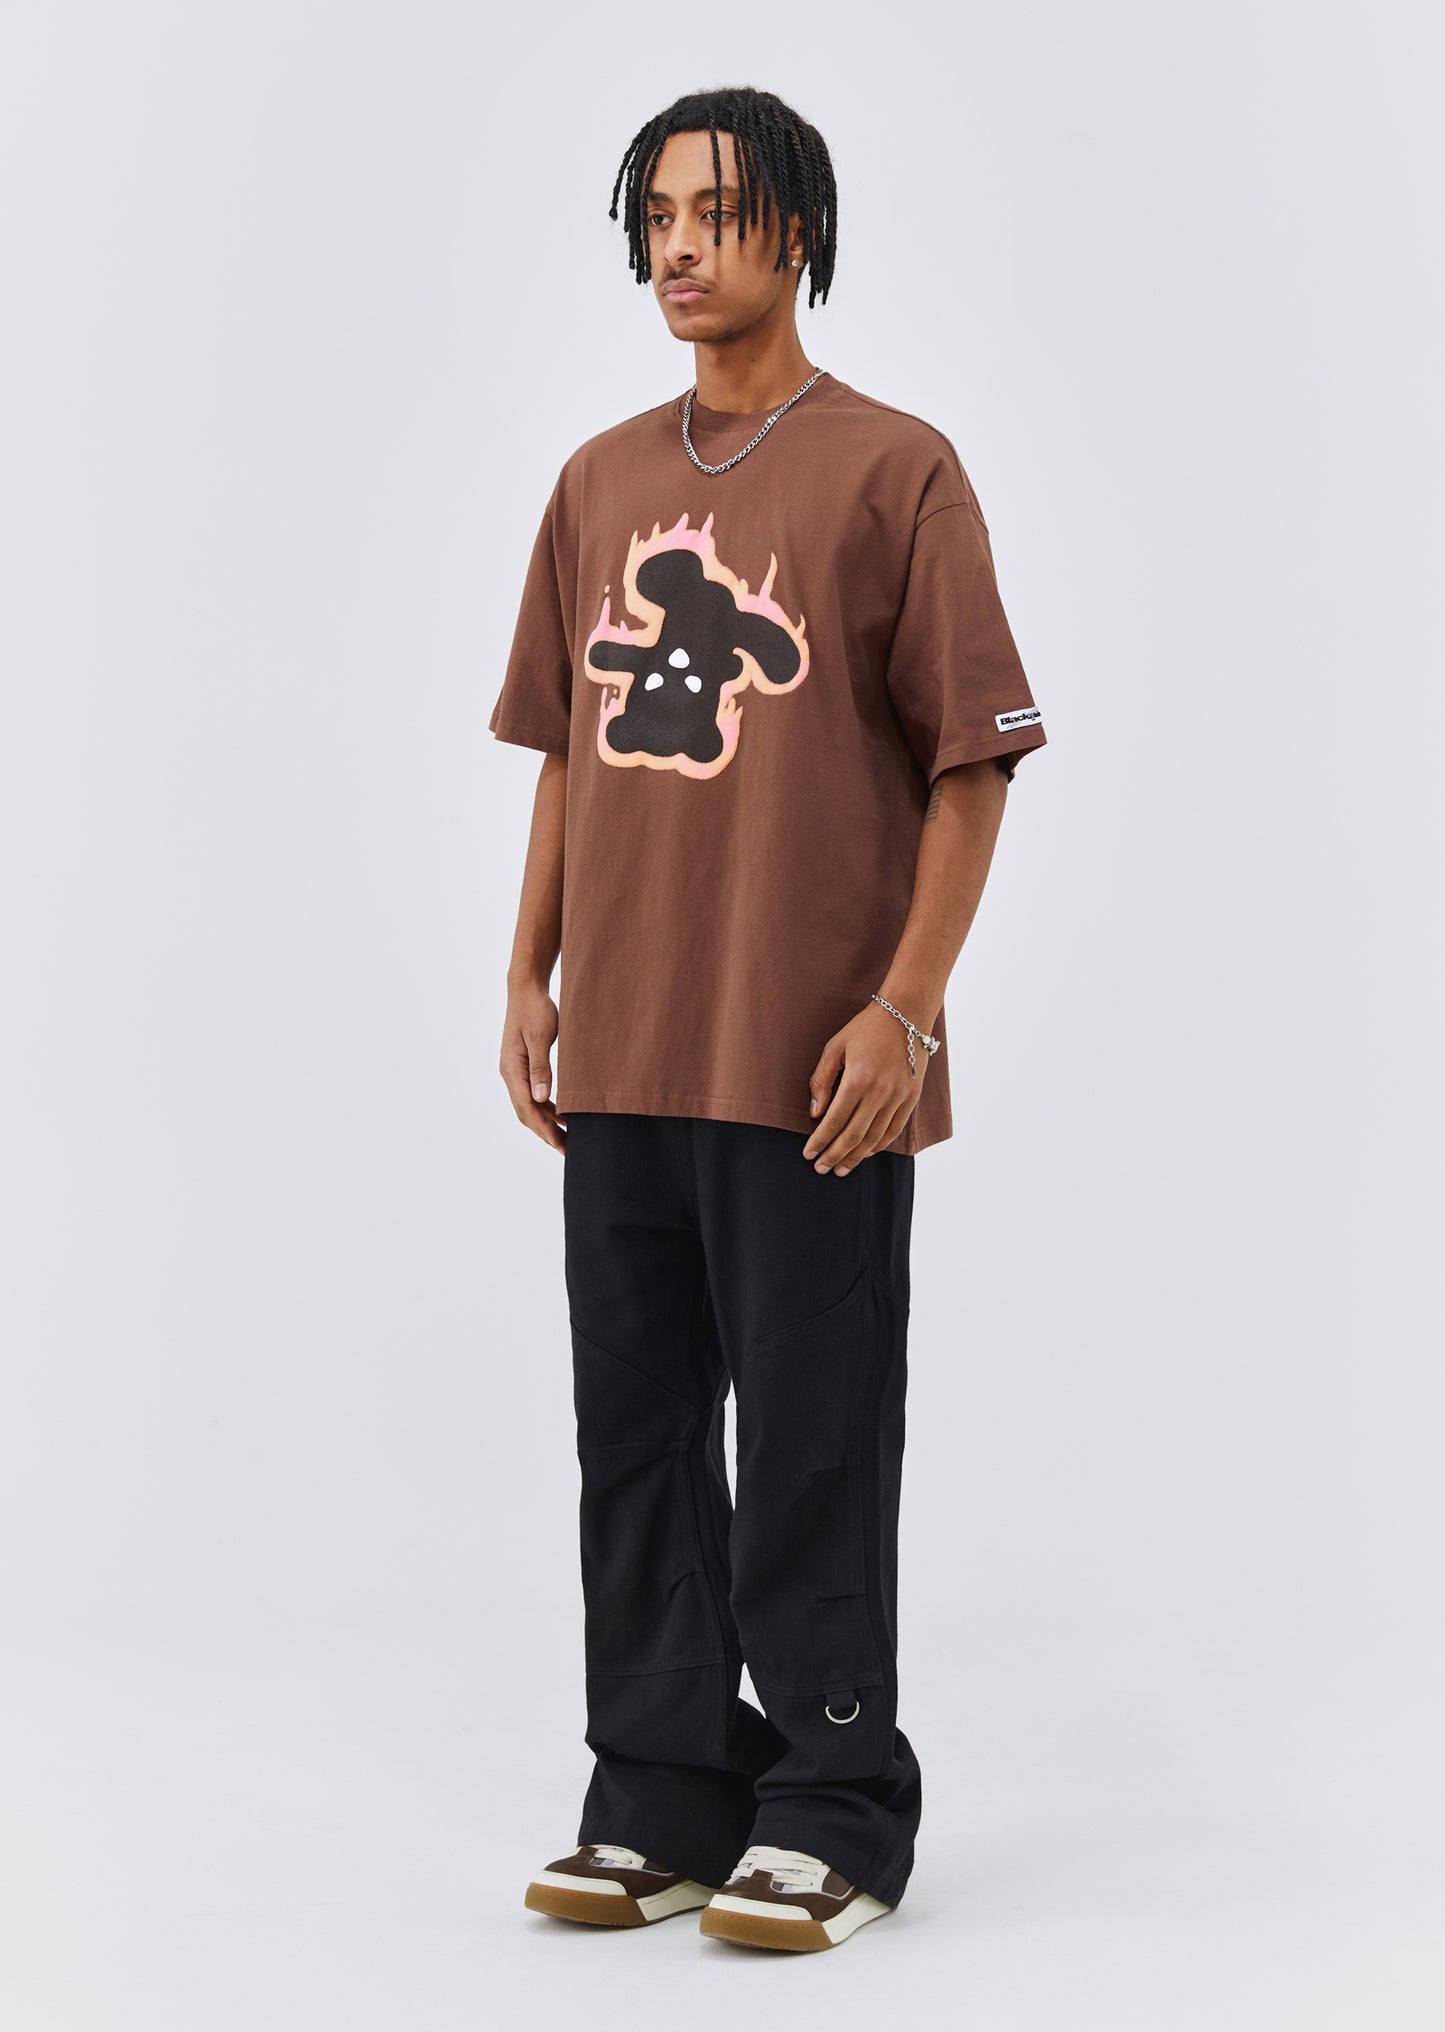 LONELY BEAR T-SHIRT